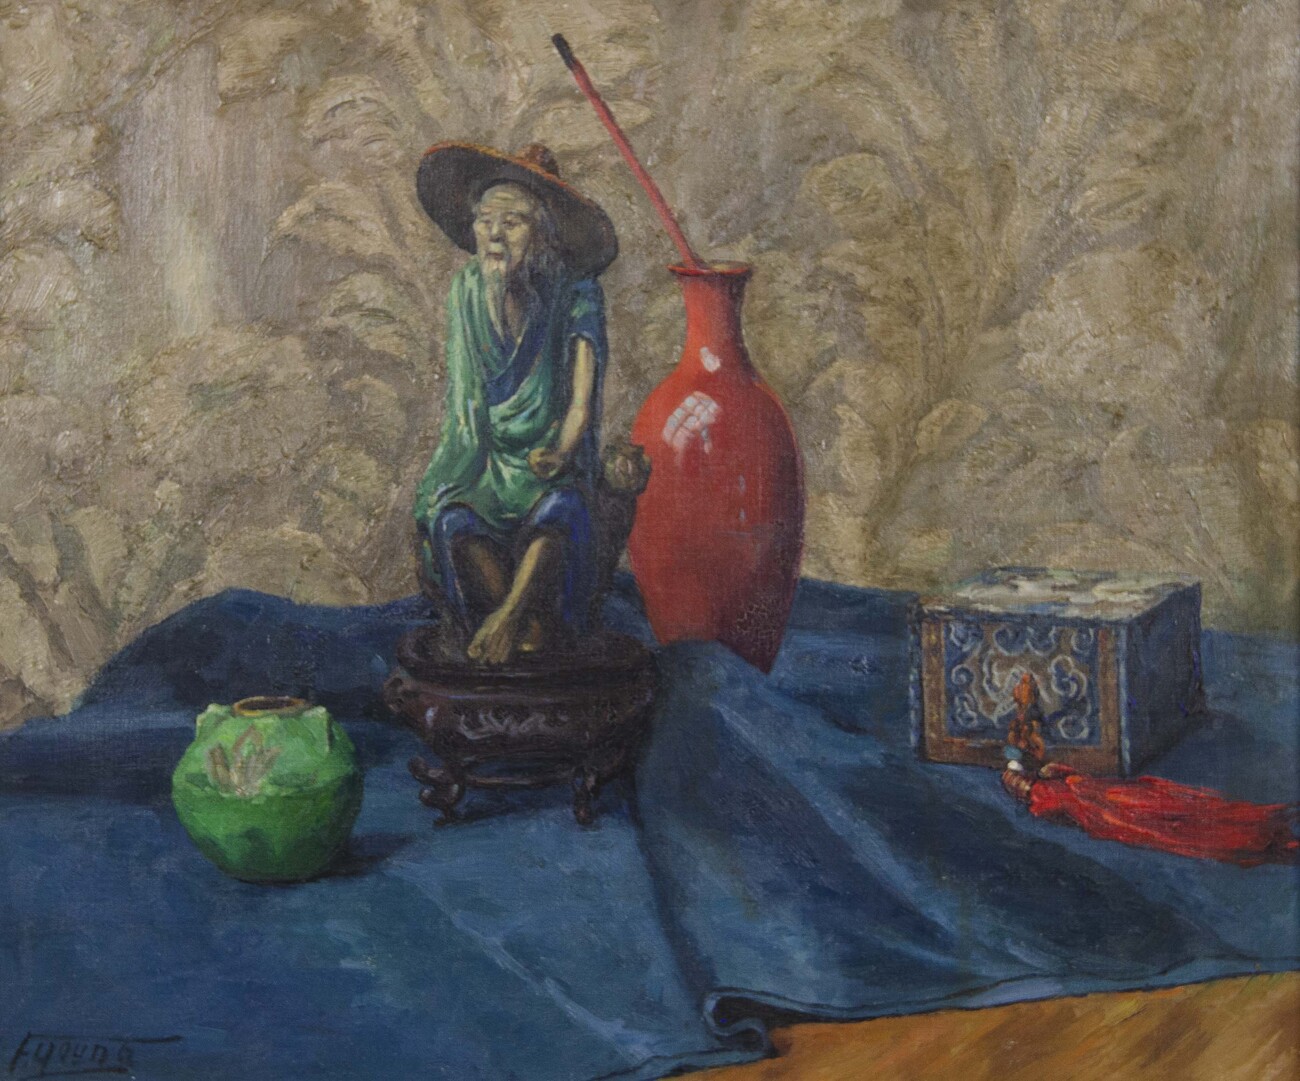 Still life painting showing a person the same size as a giant vase on blue fabric